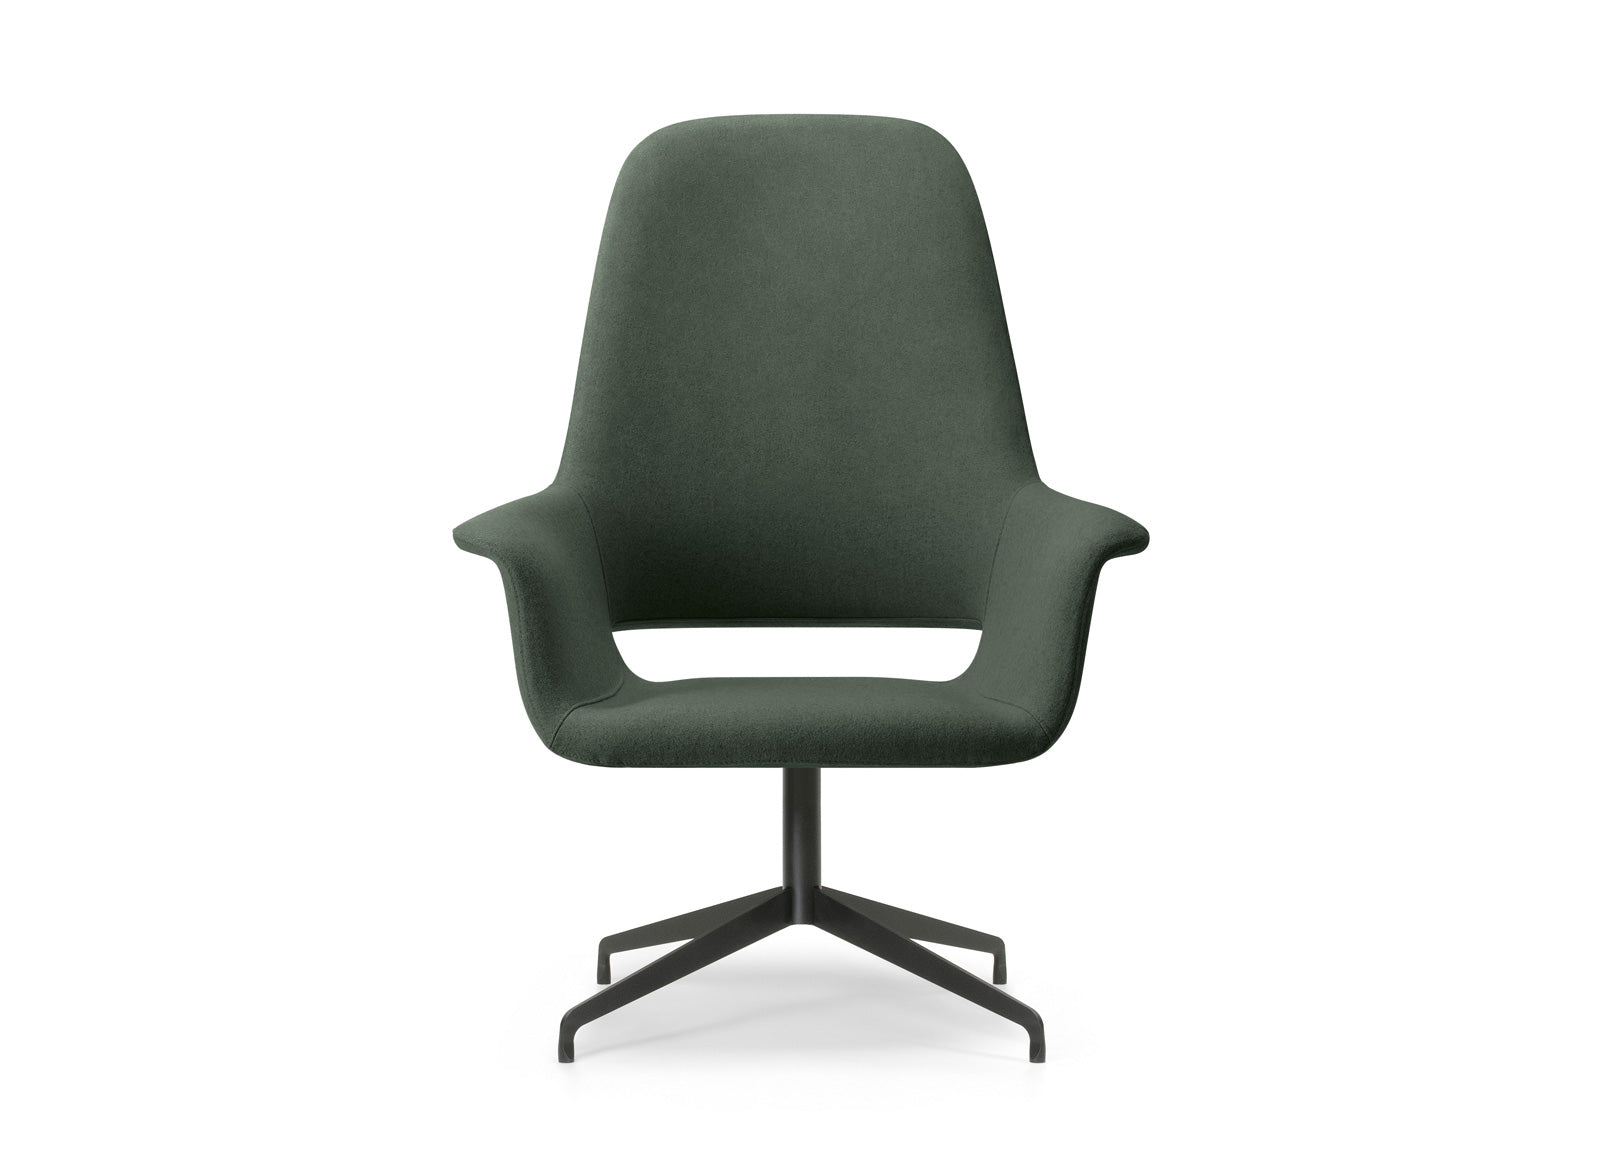 Megan 05 HB Lounge Chair c/w Spider Base-Torre-Contract Furniture Store